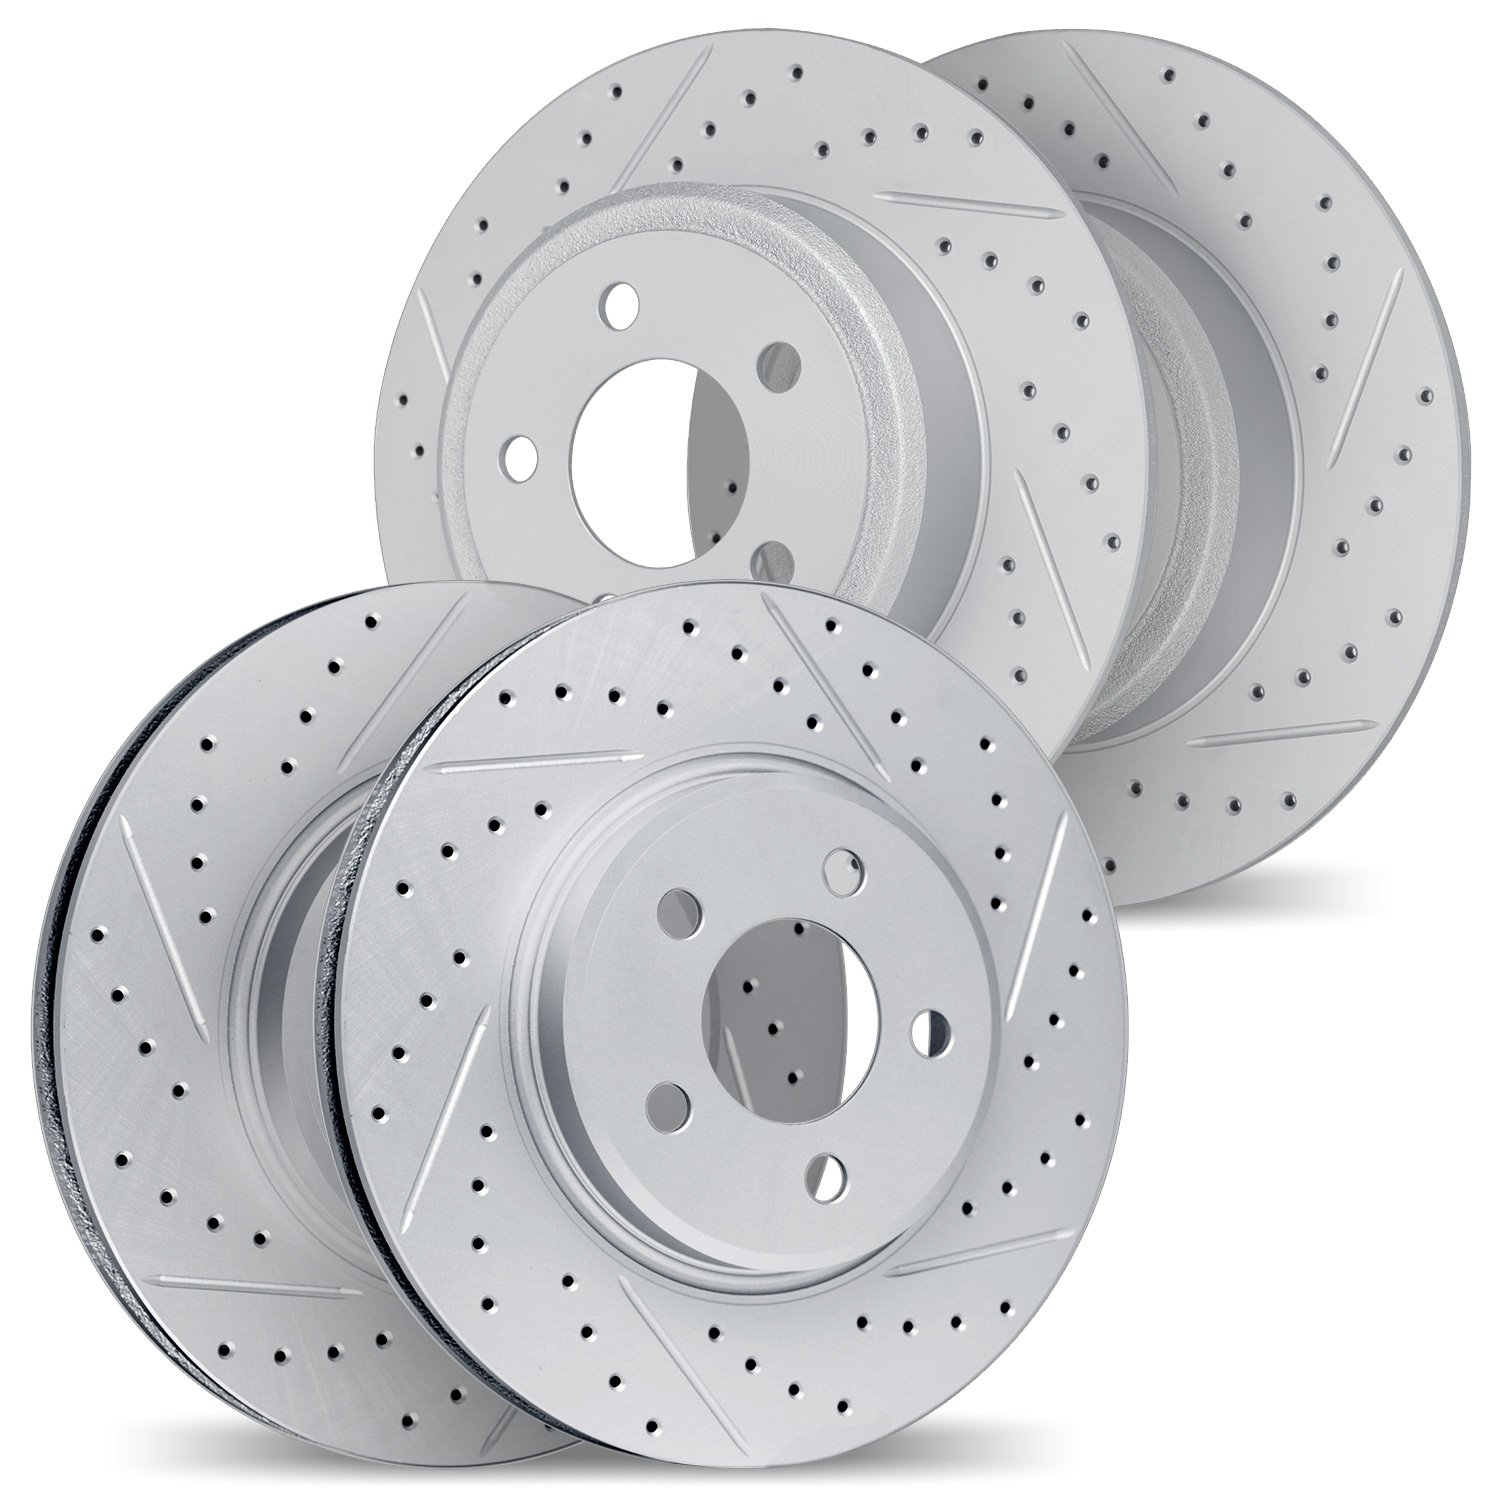 2004-21005 Geoperformance Drilled/Slotted Brake Rotors, 2017-2019 Kia/Hyundai/Genesis, Position: Front and Rear